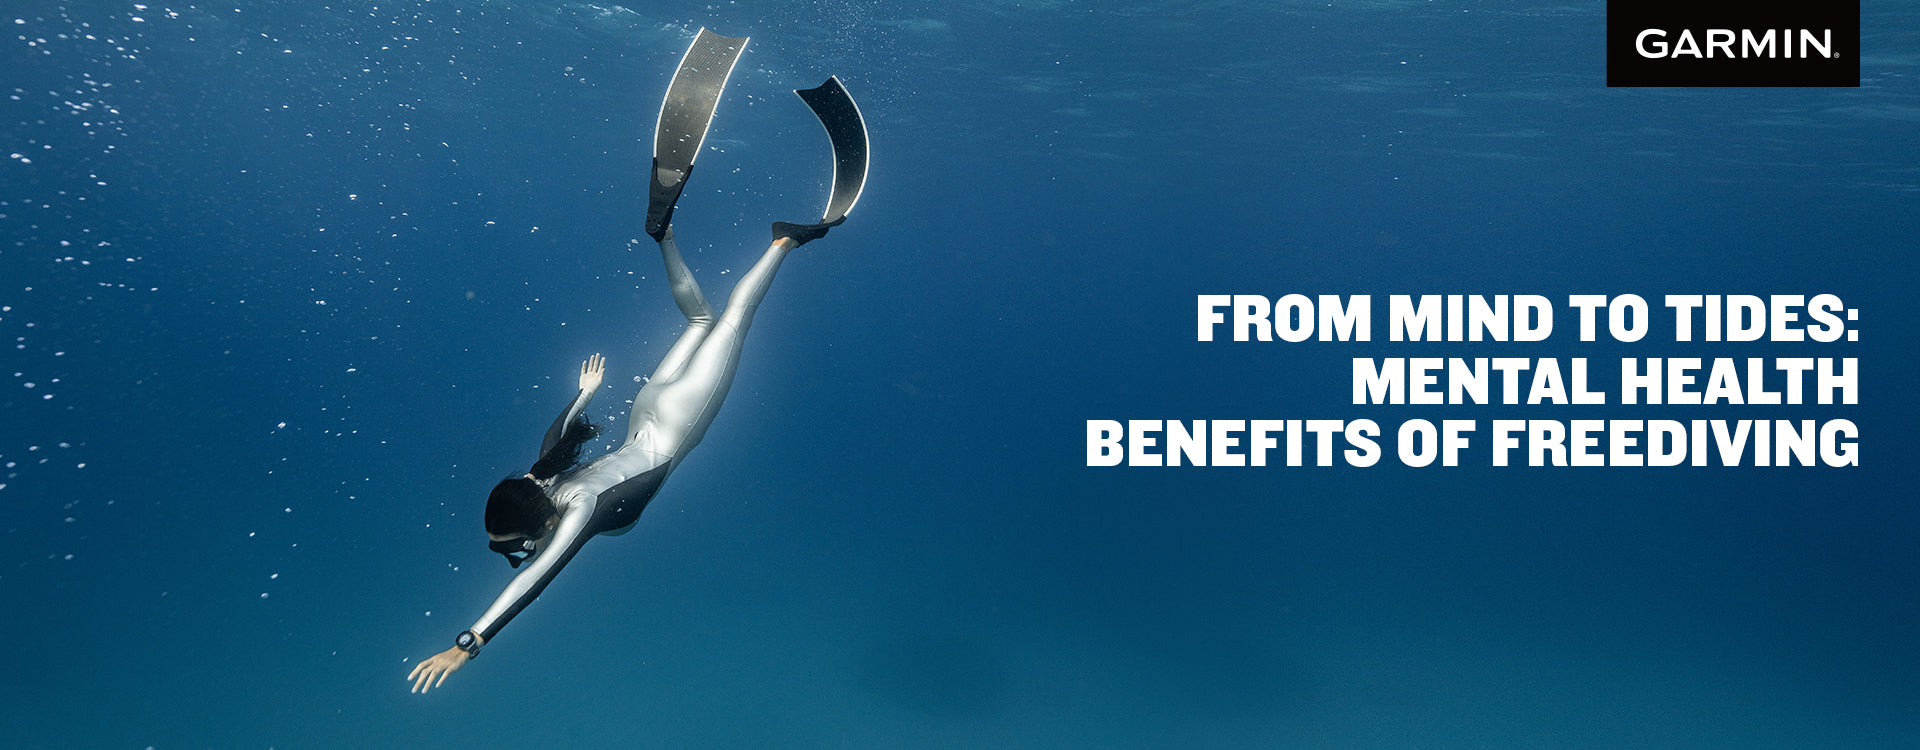 From Mind to Tides: Mental Health Benefits of Freediving